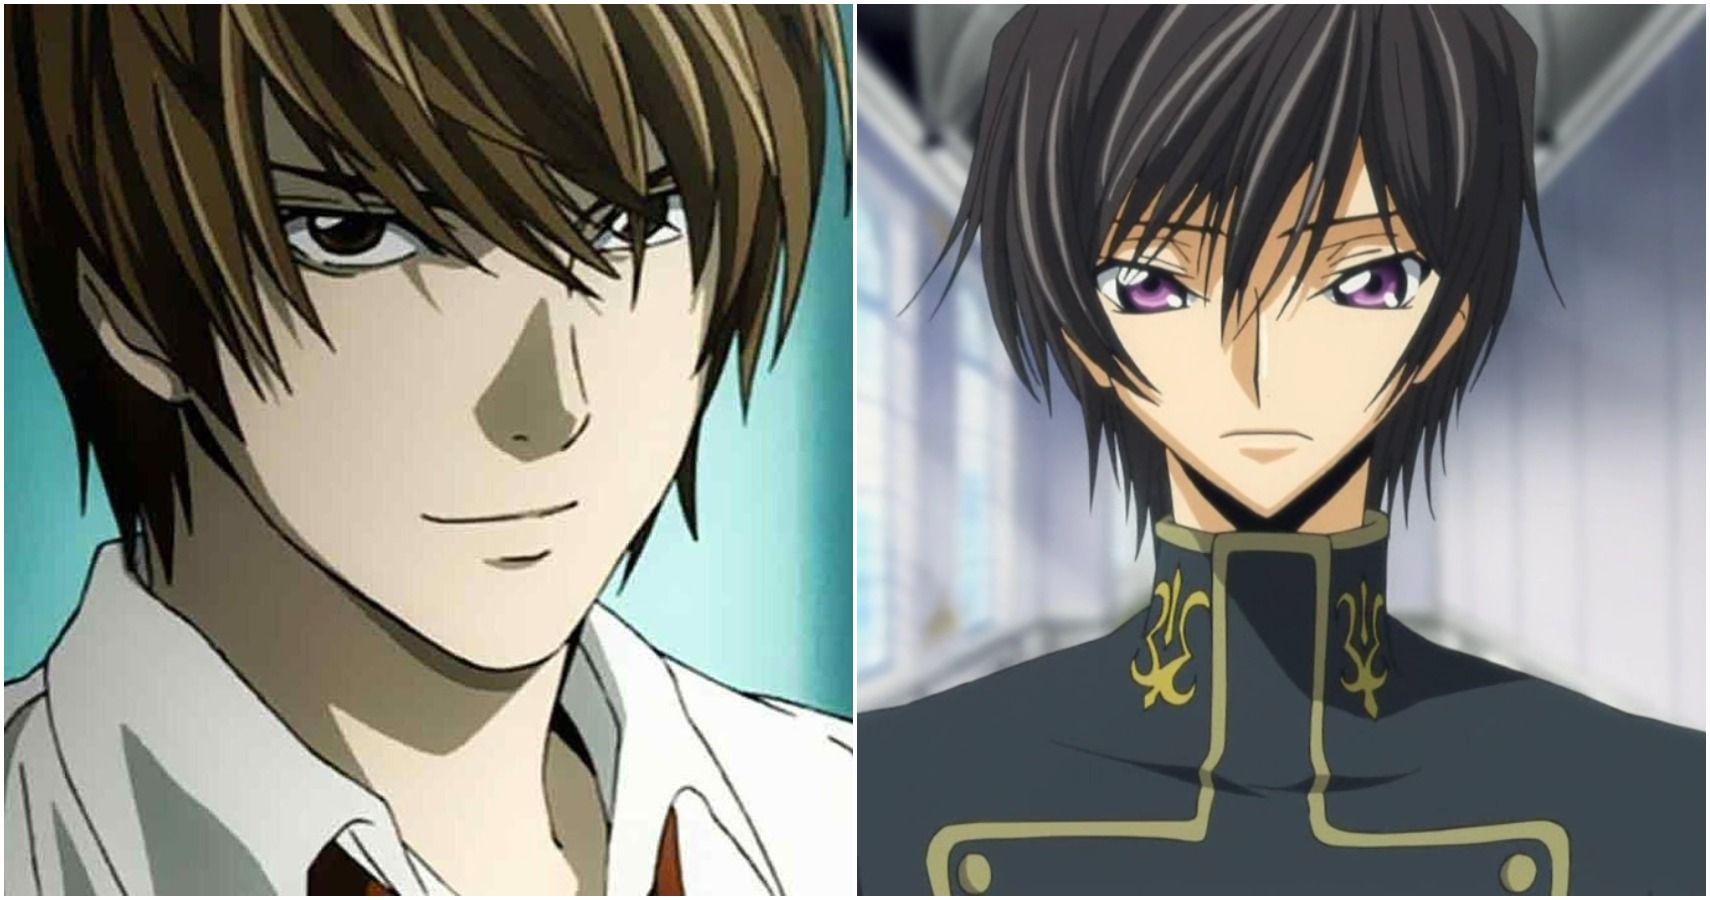 Code Geass 5 Anime Heroes Lelouch Lamperouge Could Easily Outsmart 5 He Couldn T